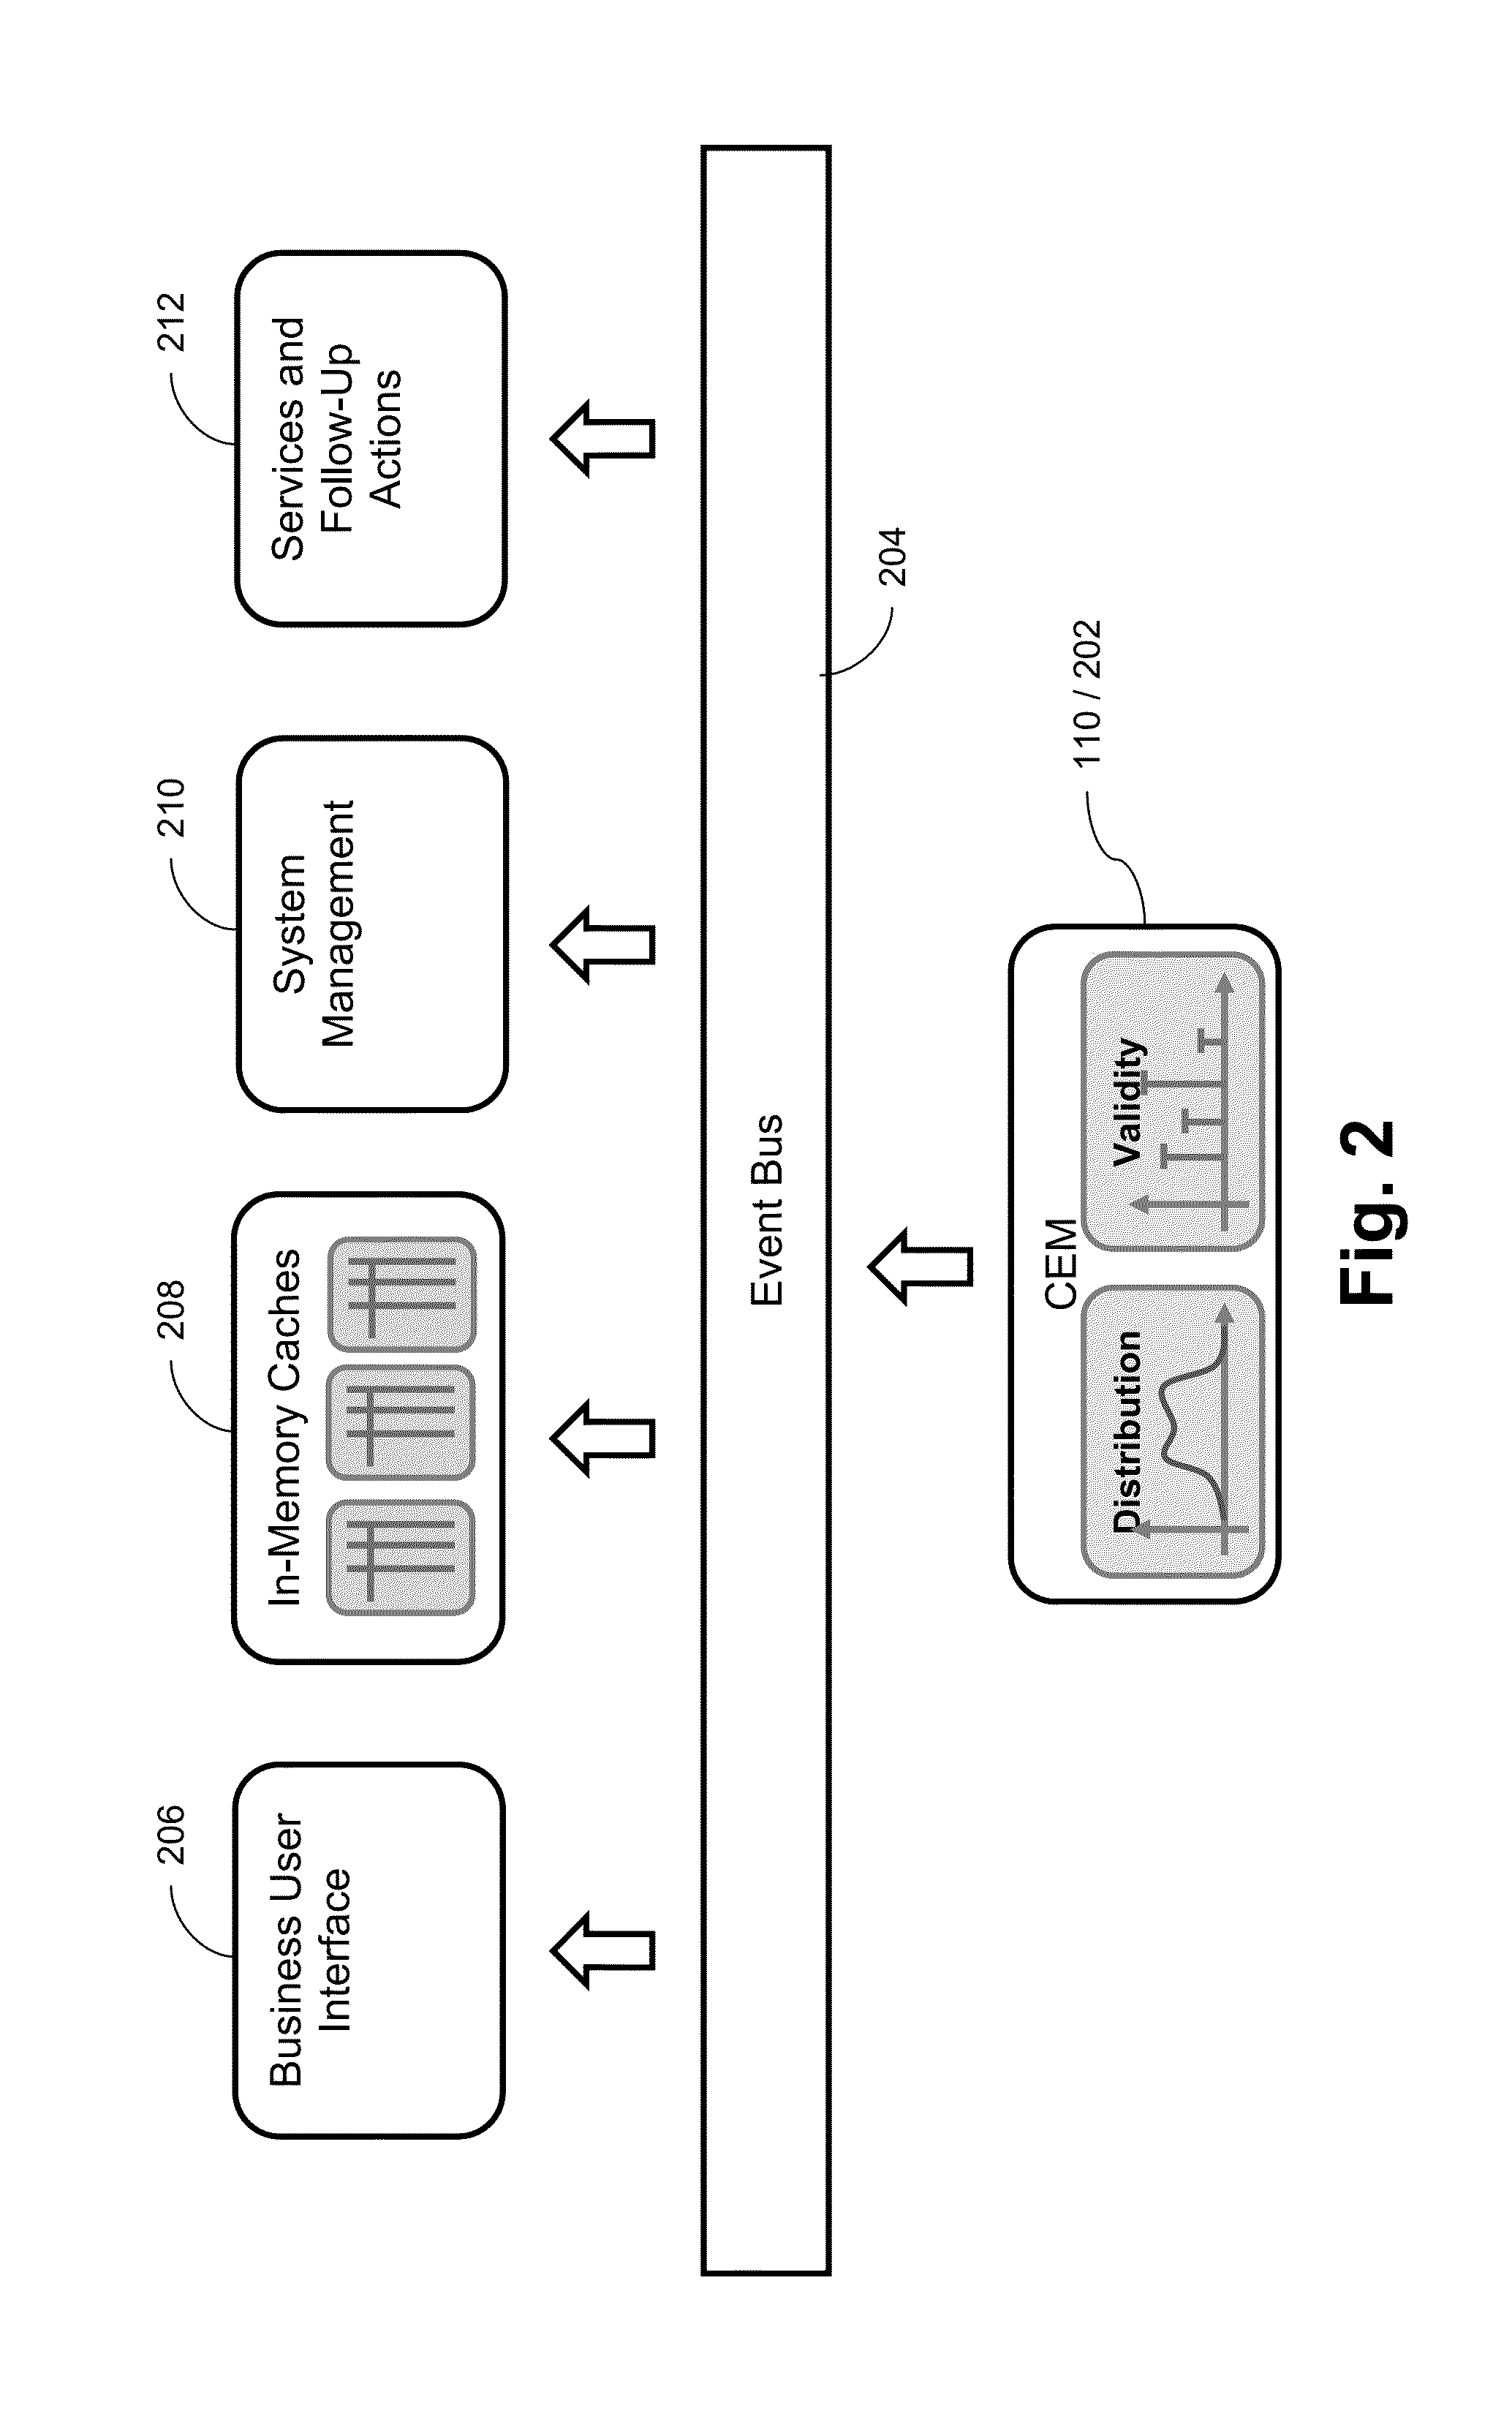 Systems and/or methods for statistical online analysis of large and potentially heterogeneous data sets